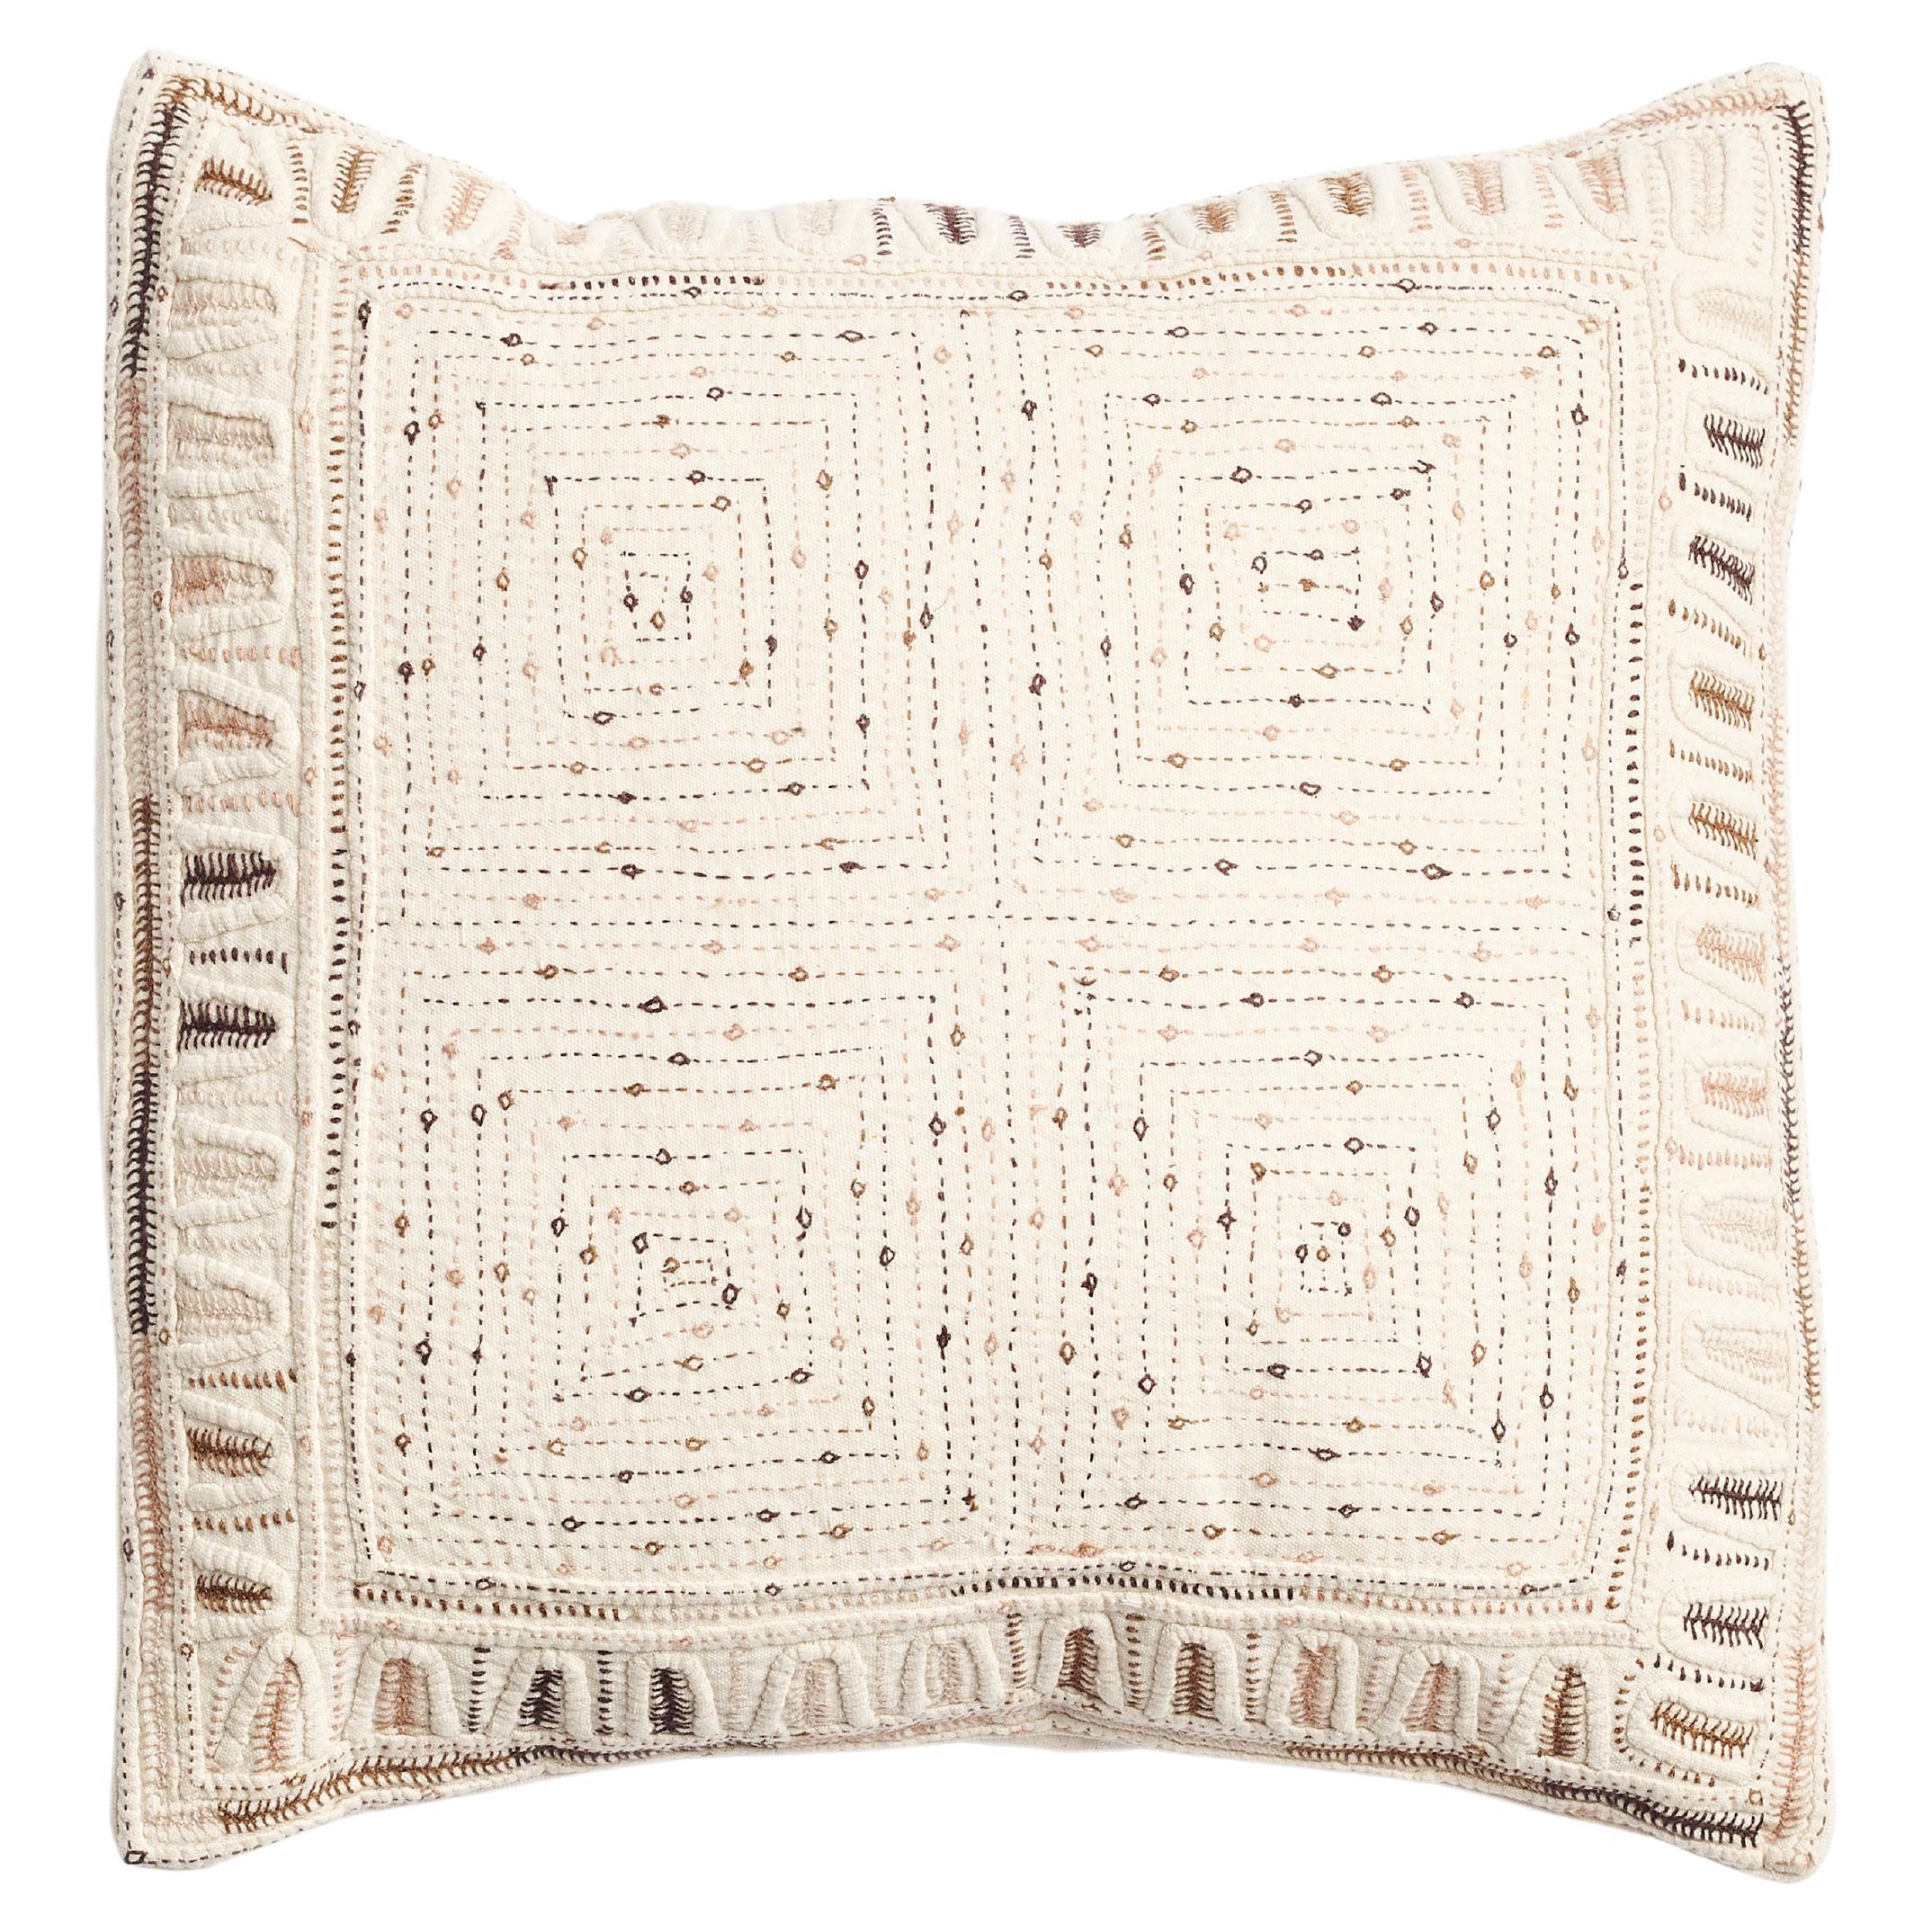 Maze Brown Pillow Hand Embroidered on Handwoven Organic Cotton by Artisans For Sale